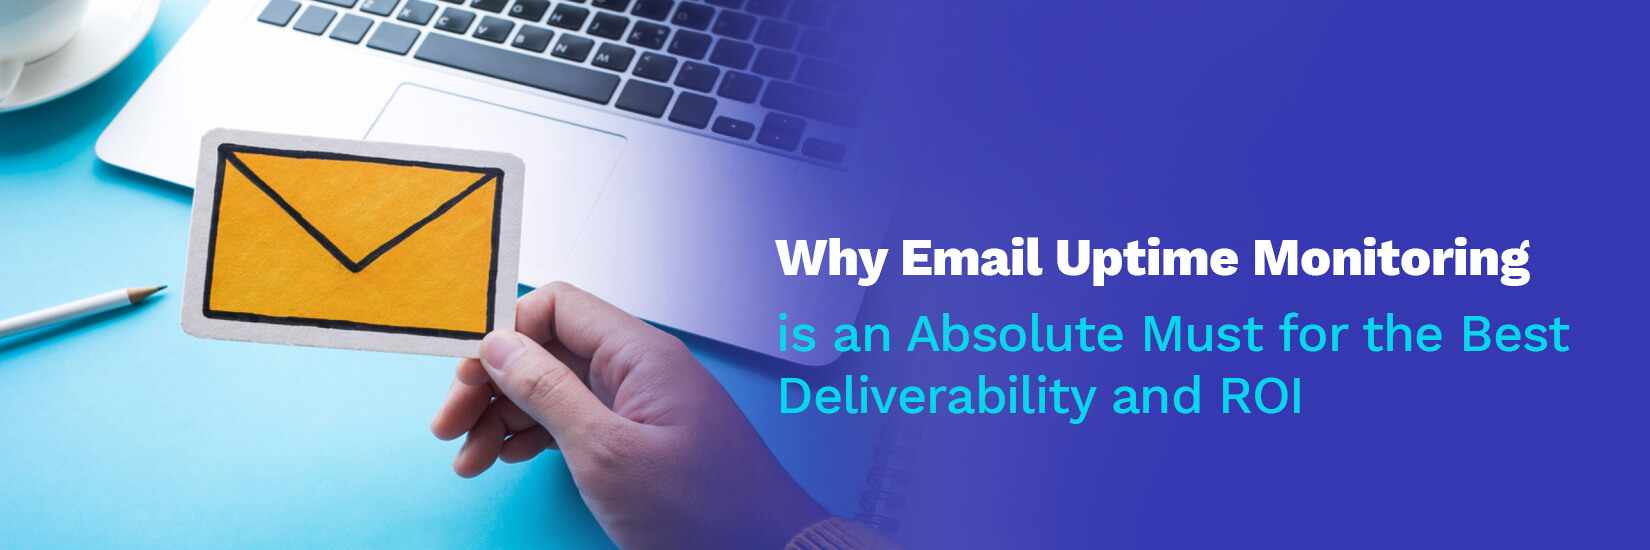 Why Email Uptime Monitoring Is A Must For Best Deliverability & ROI